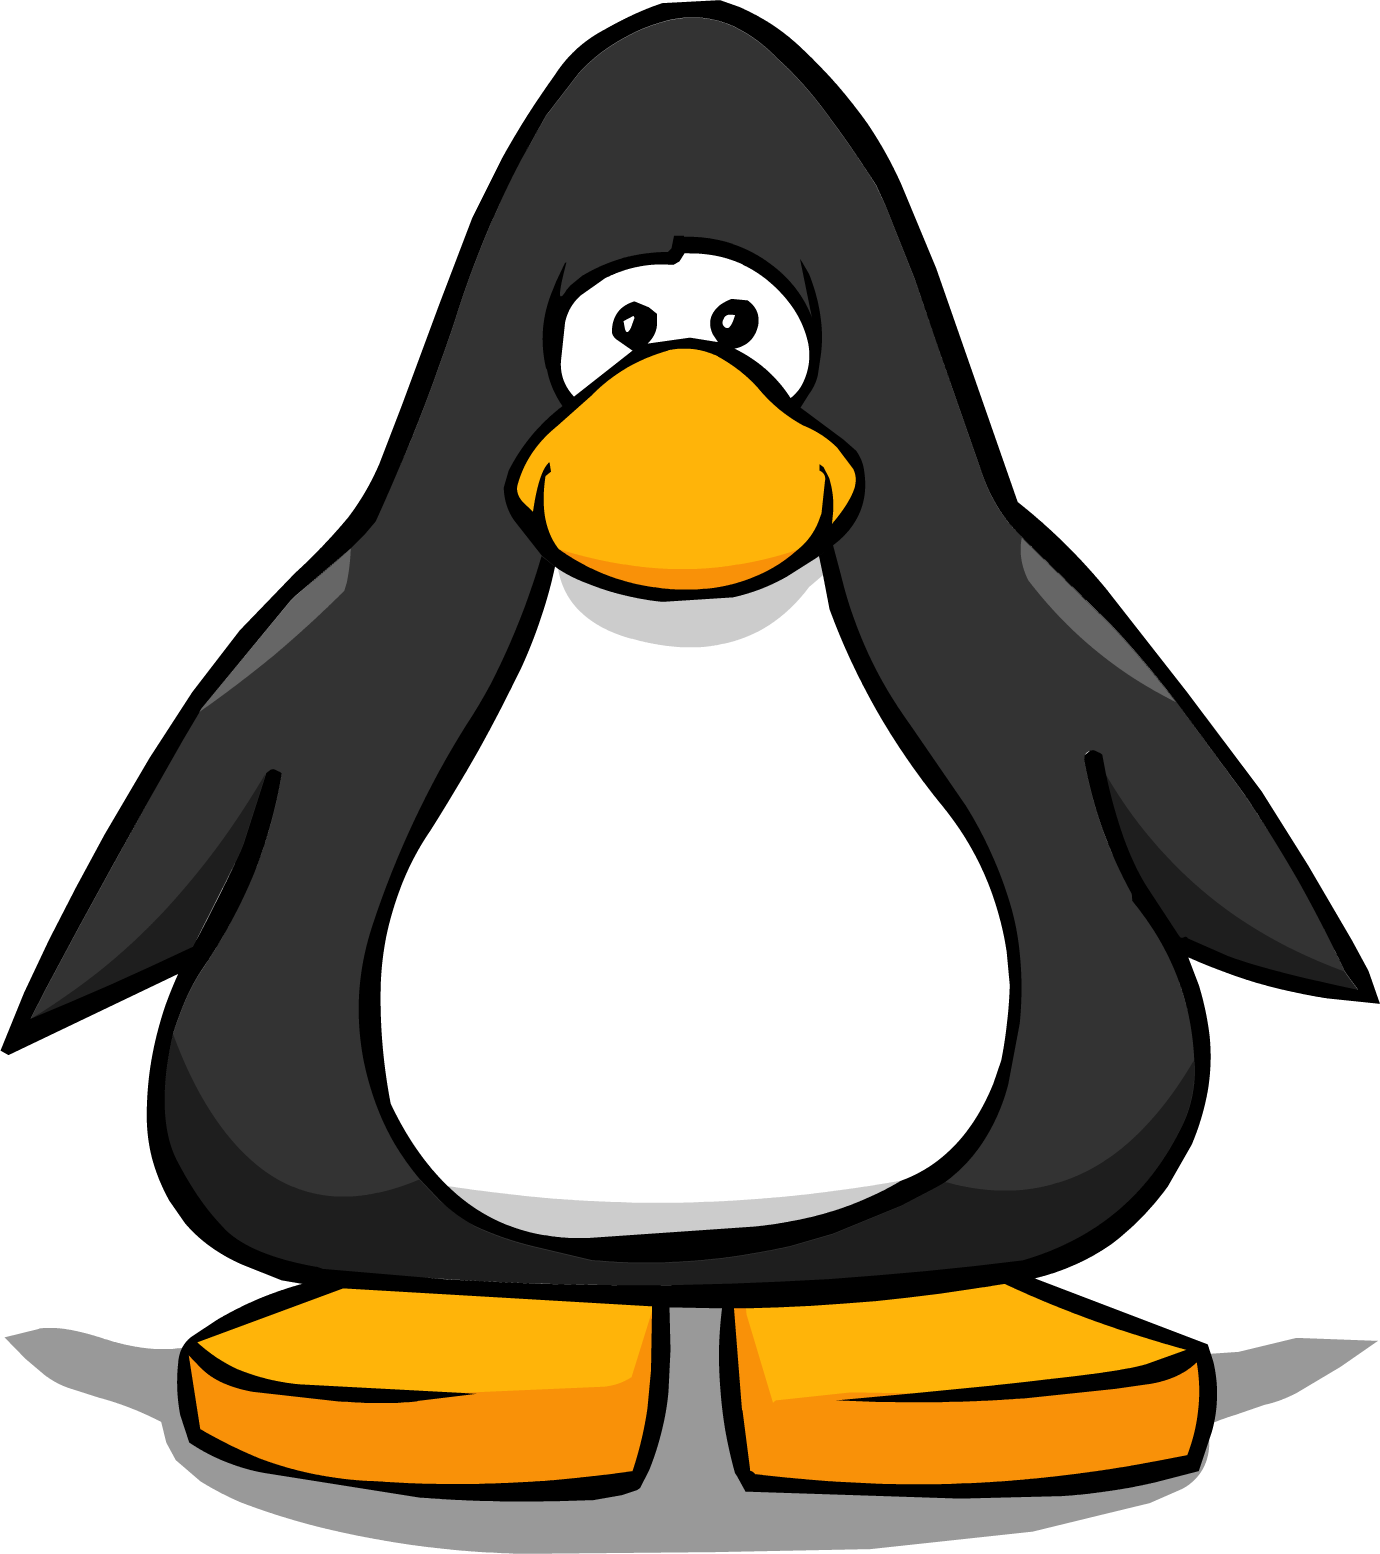 Club Penguin png images